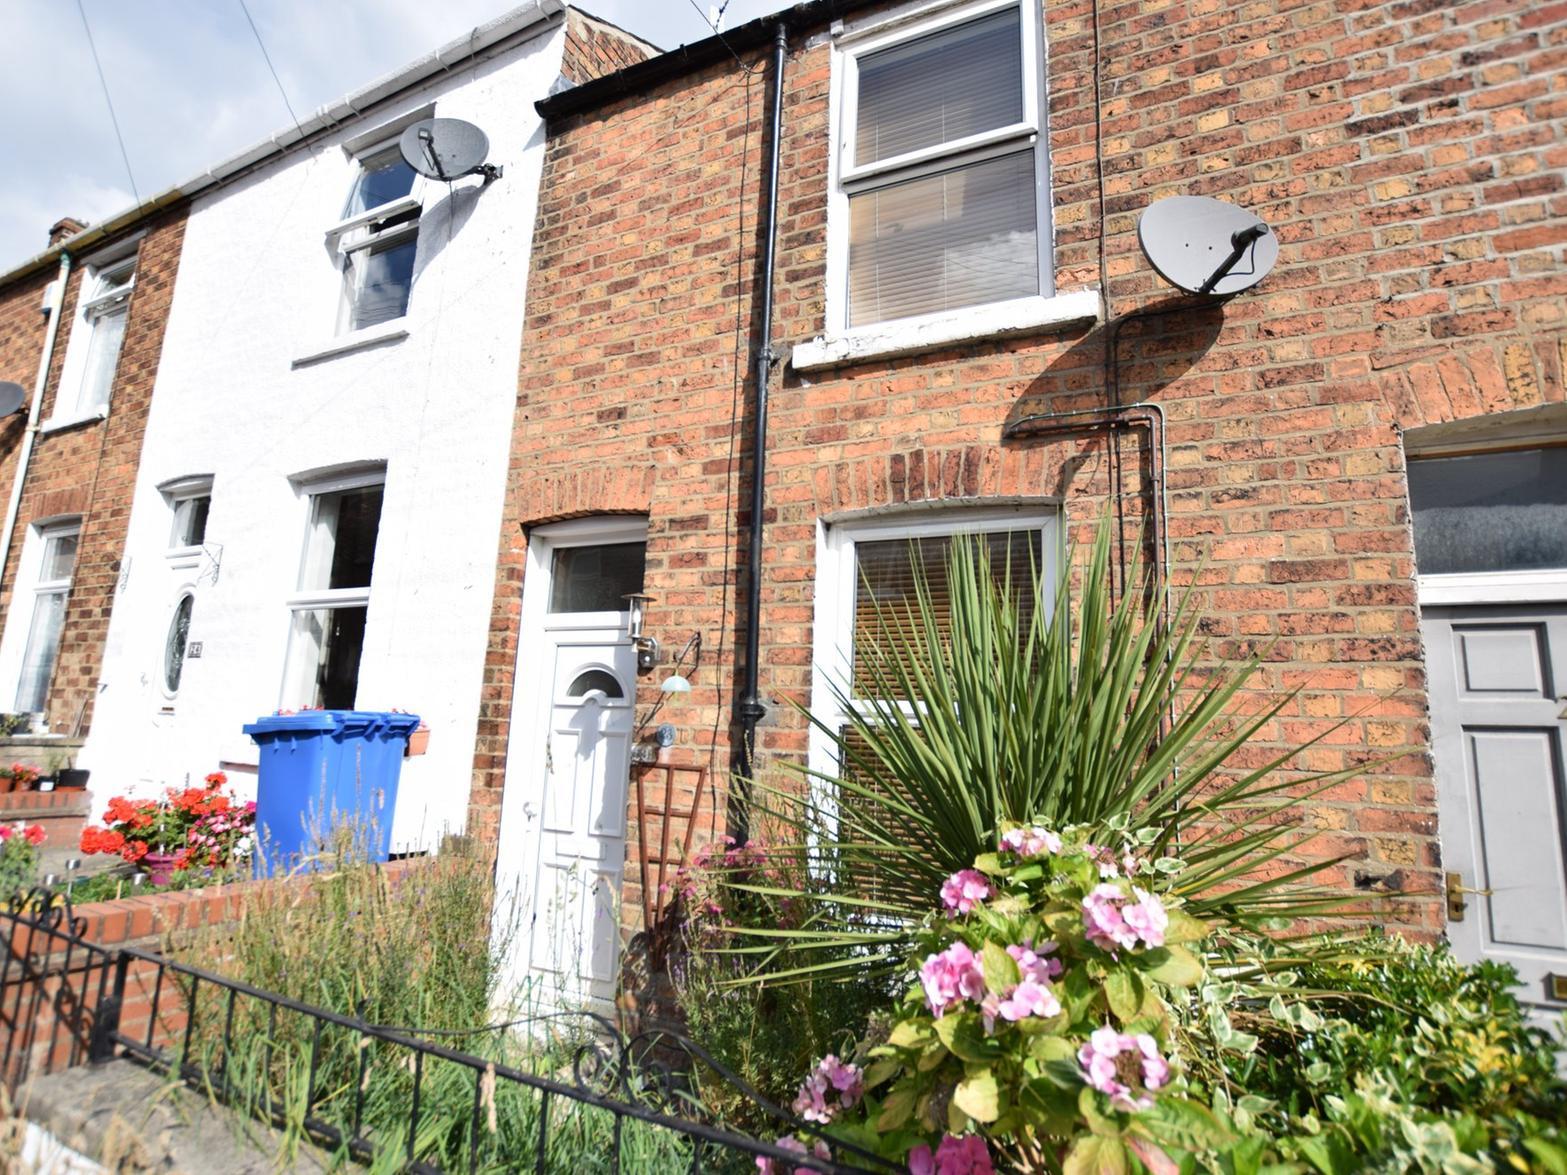 A two-bedroom terrace house on sale for 85,000. The property has a small forecourt and a fully enclosed rear yard.